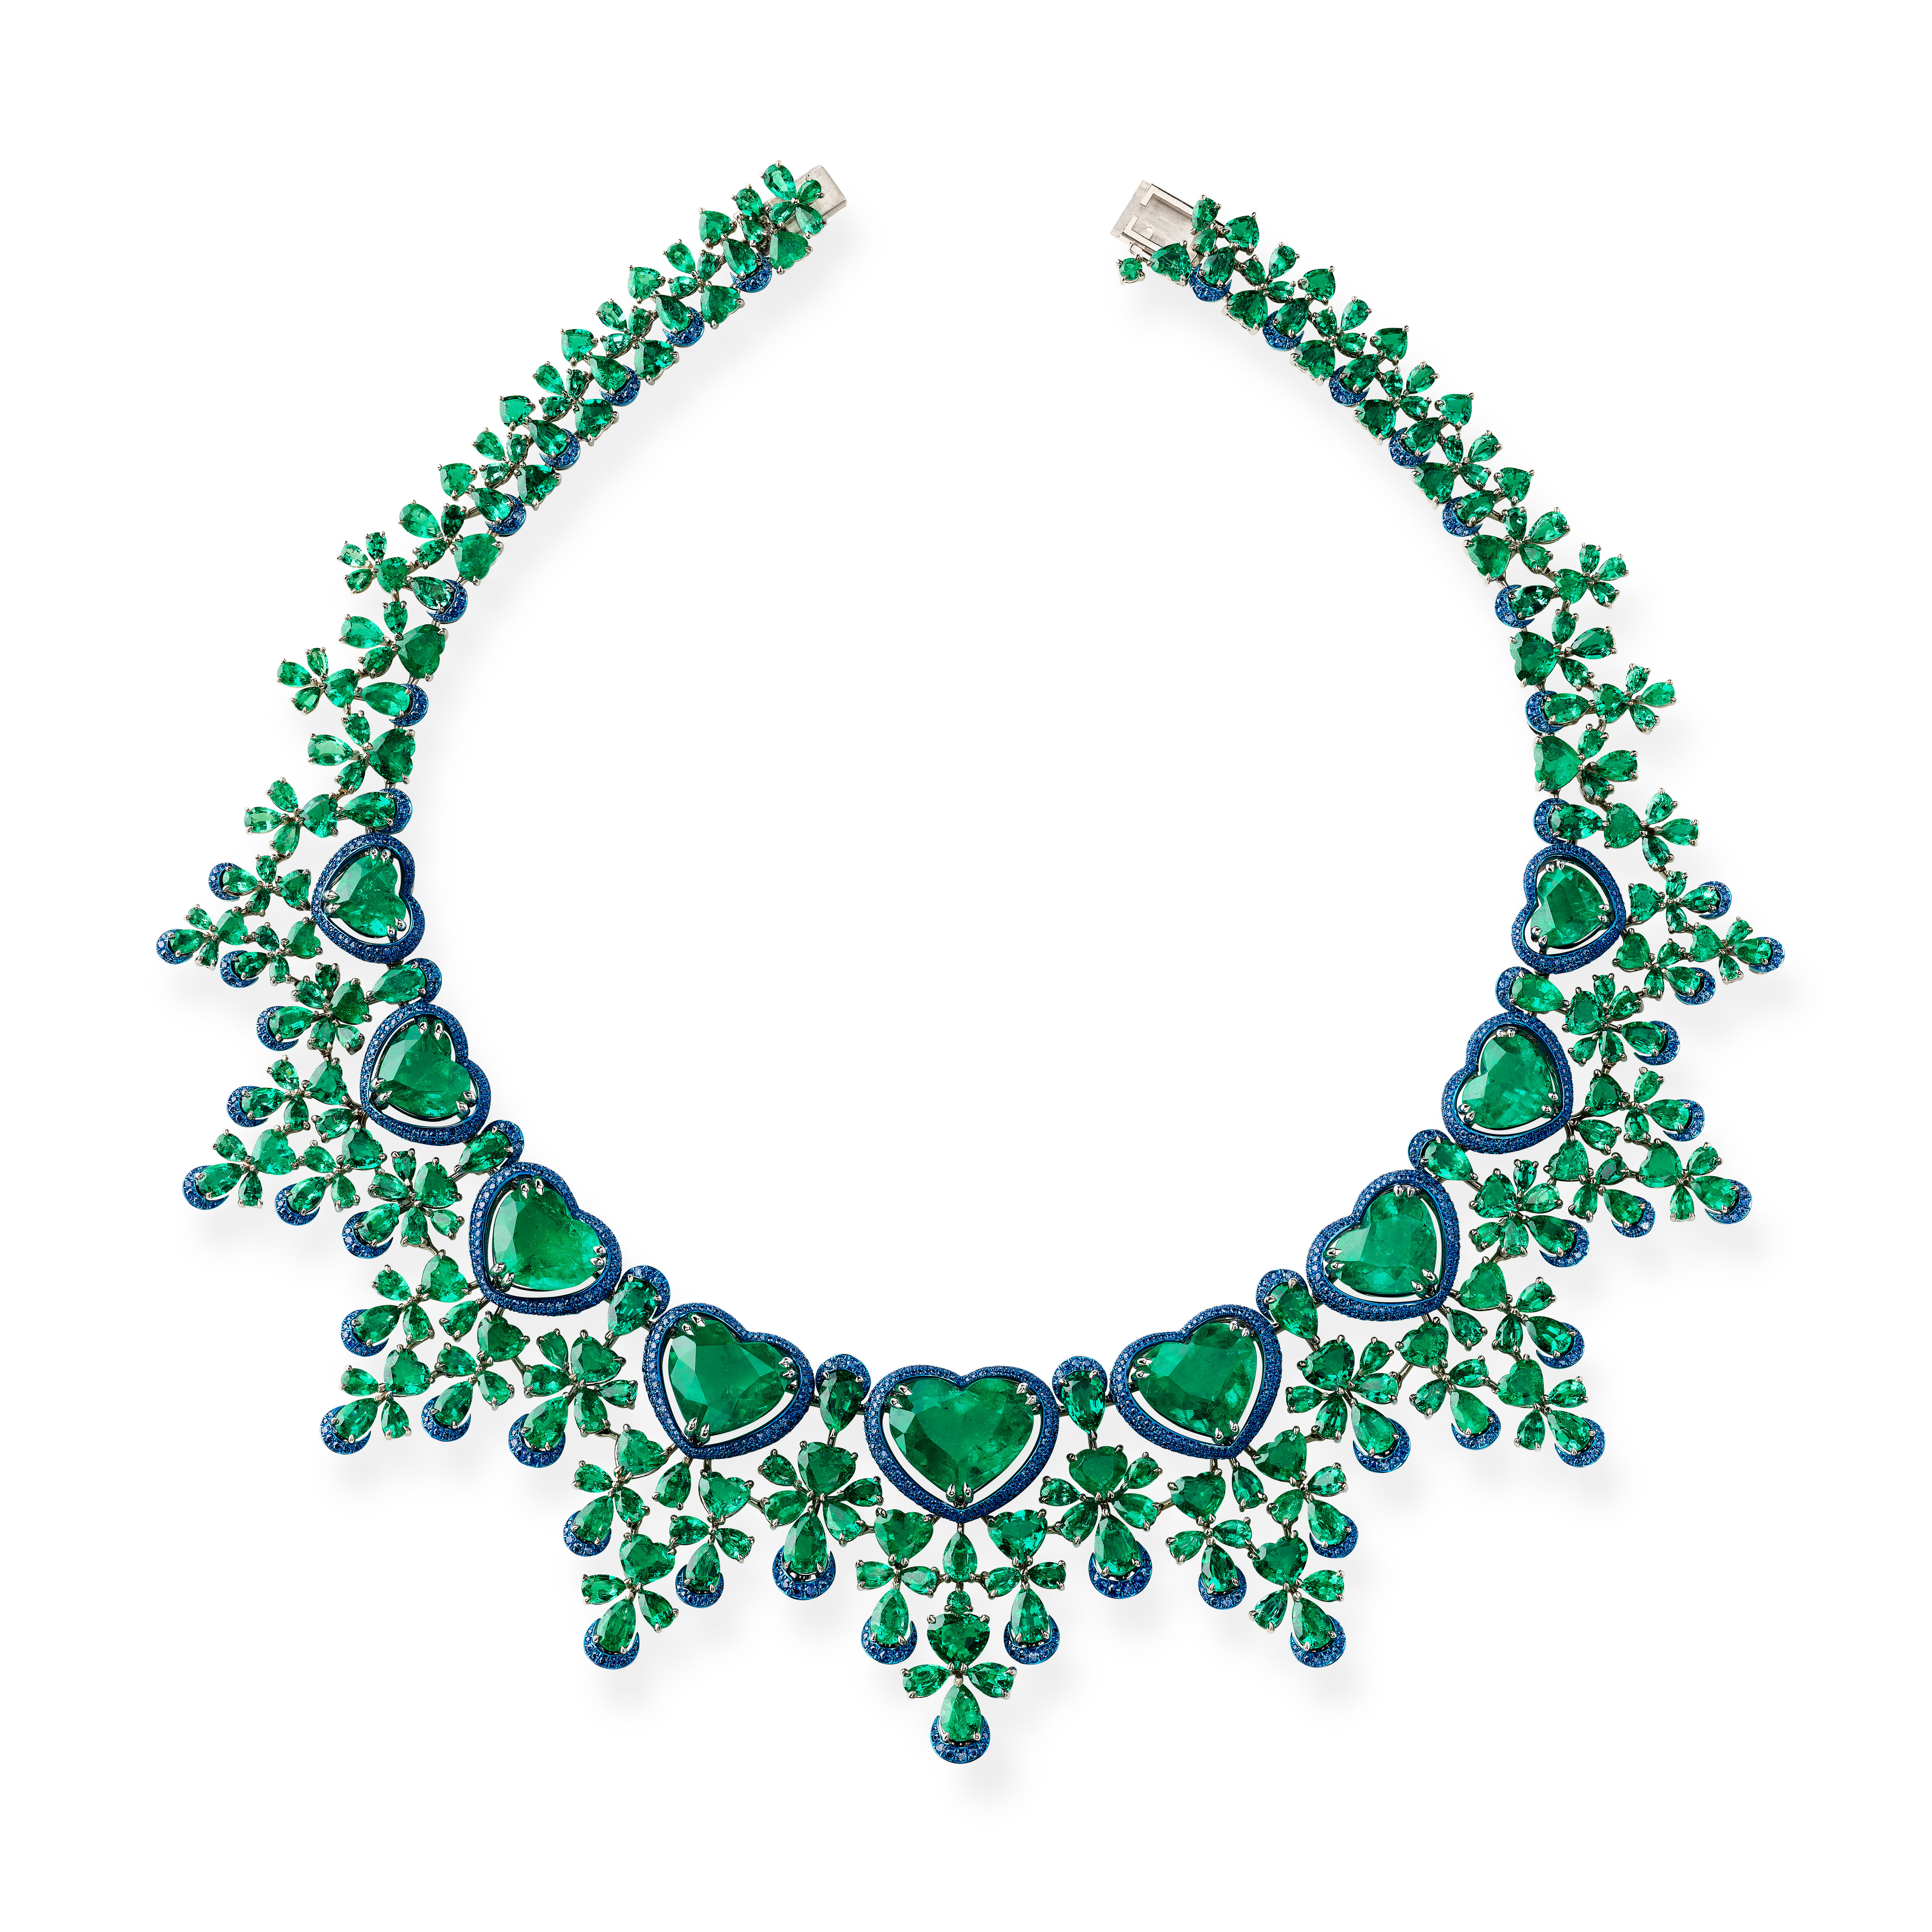 Chopard brings a playful edge to its red carpet-worthy high jewellery